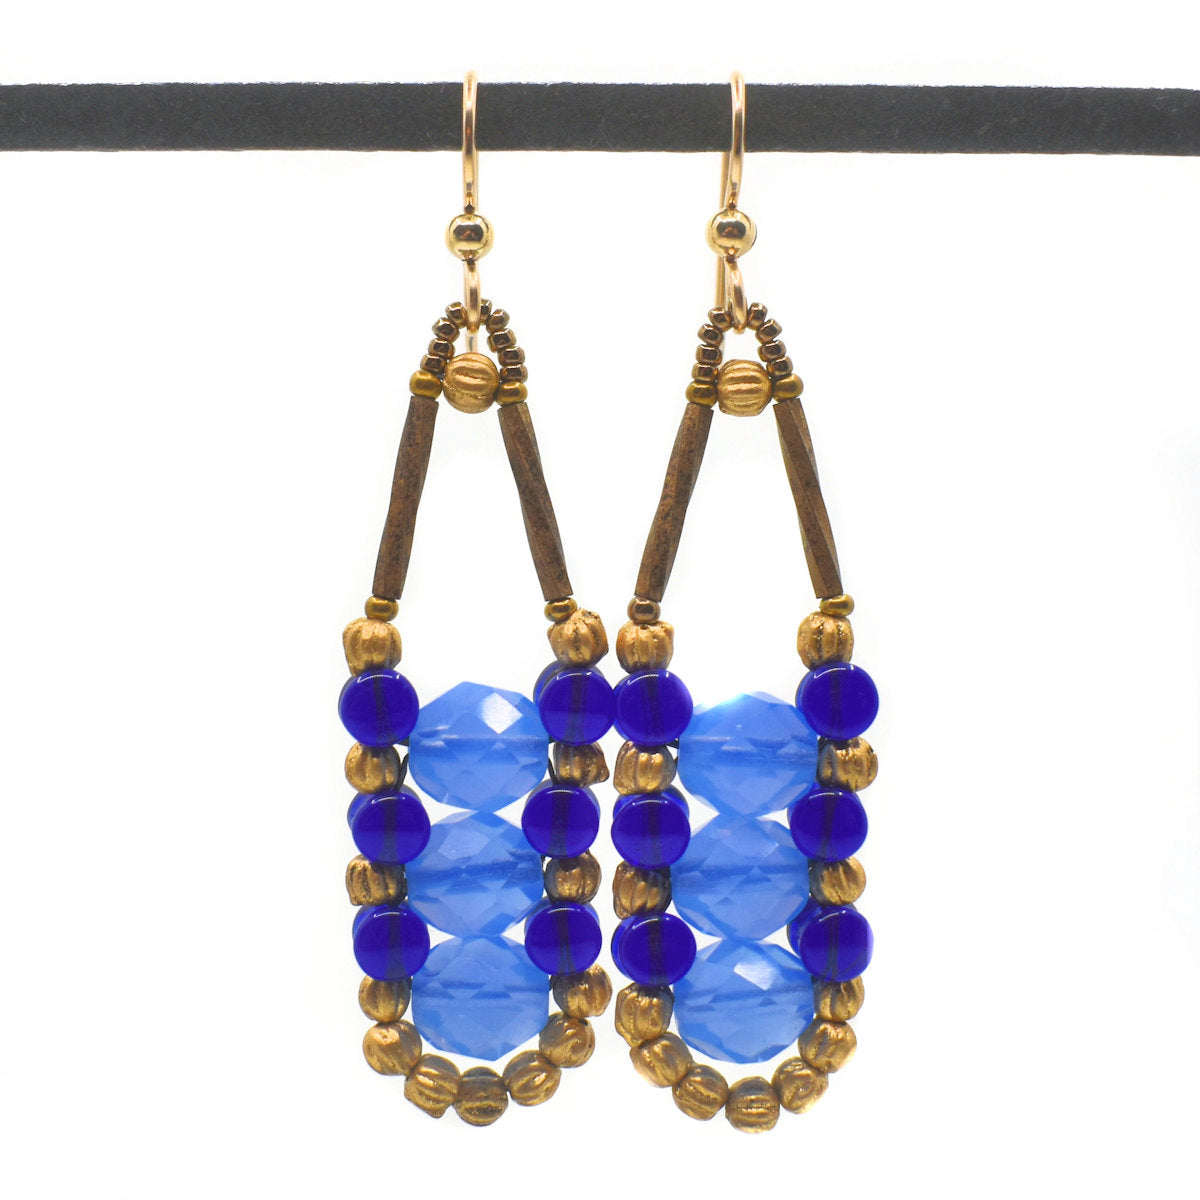 Translucent light and dark blue earrings with gold accents and wires hang from a black bar against a white background. These earrings each have three semi-transparent light blue rounds held in place by an outline of transparent cobalt and gold beads.